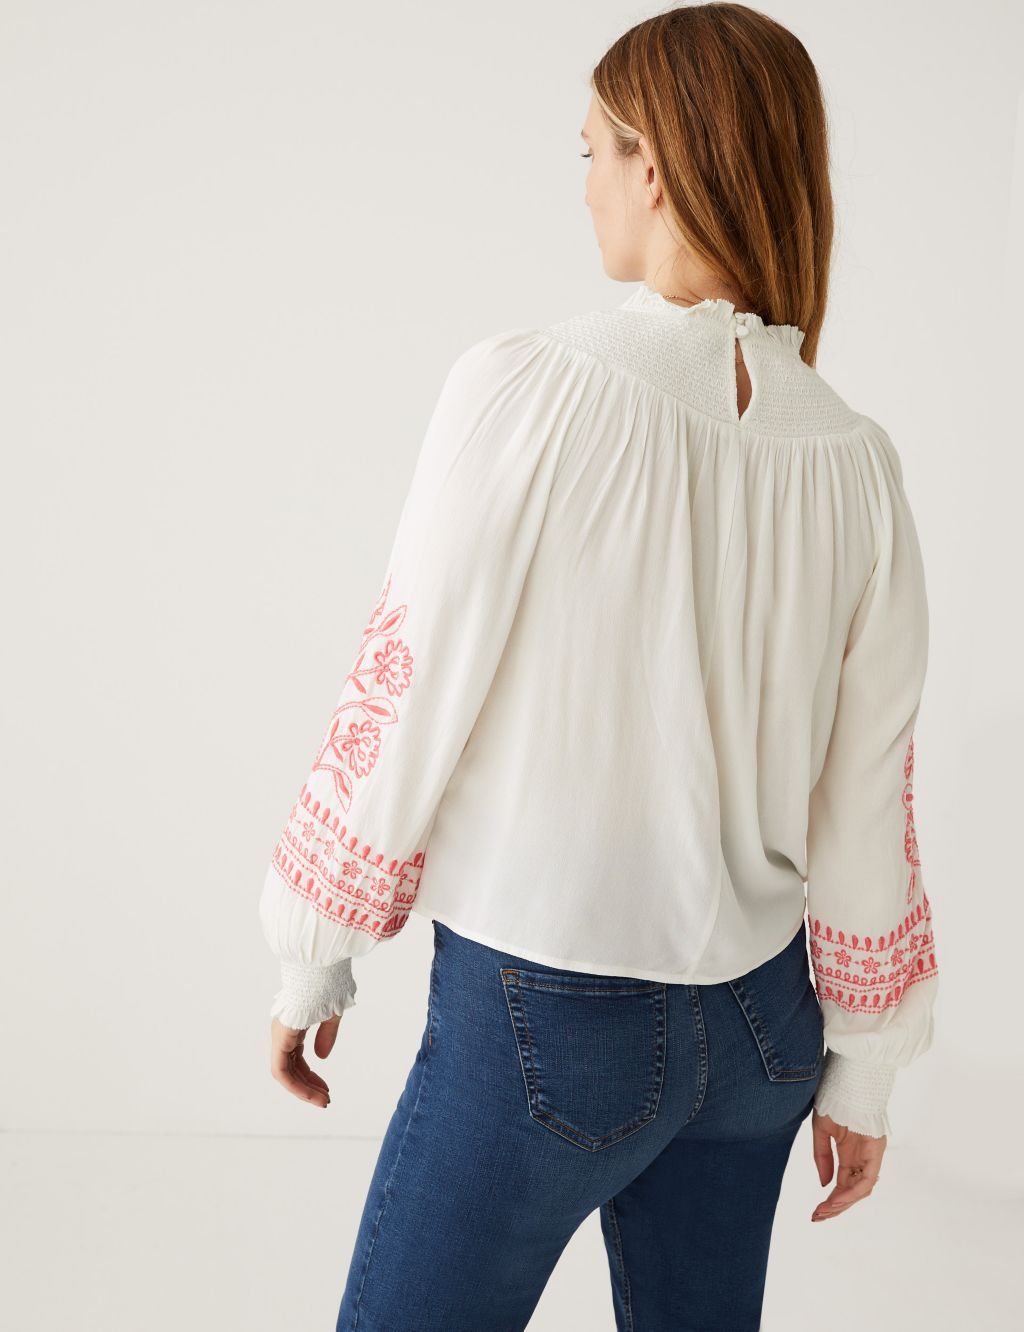 Embroidered Funnel Neck Blouse image 5